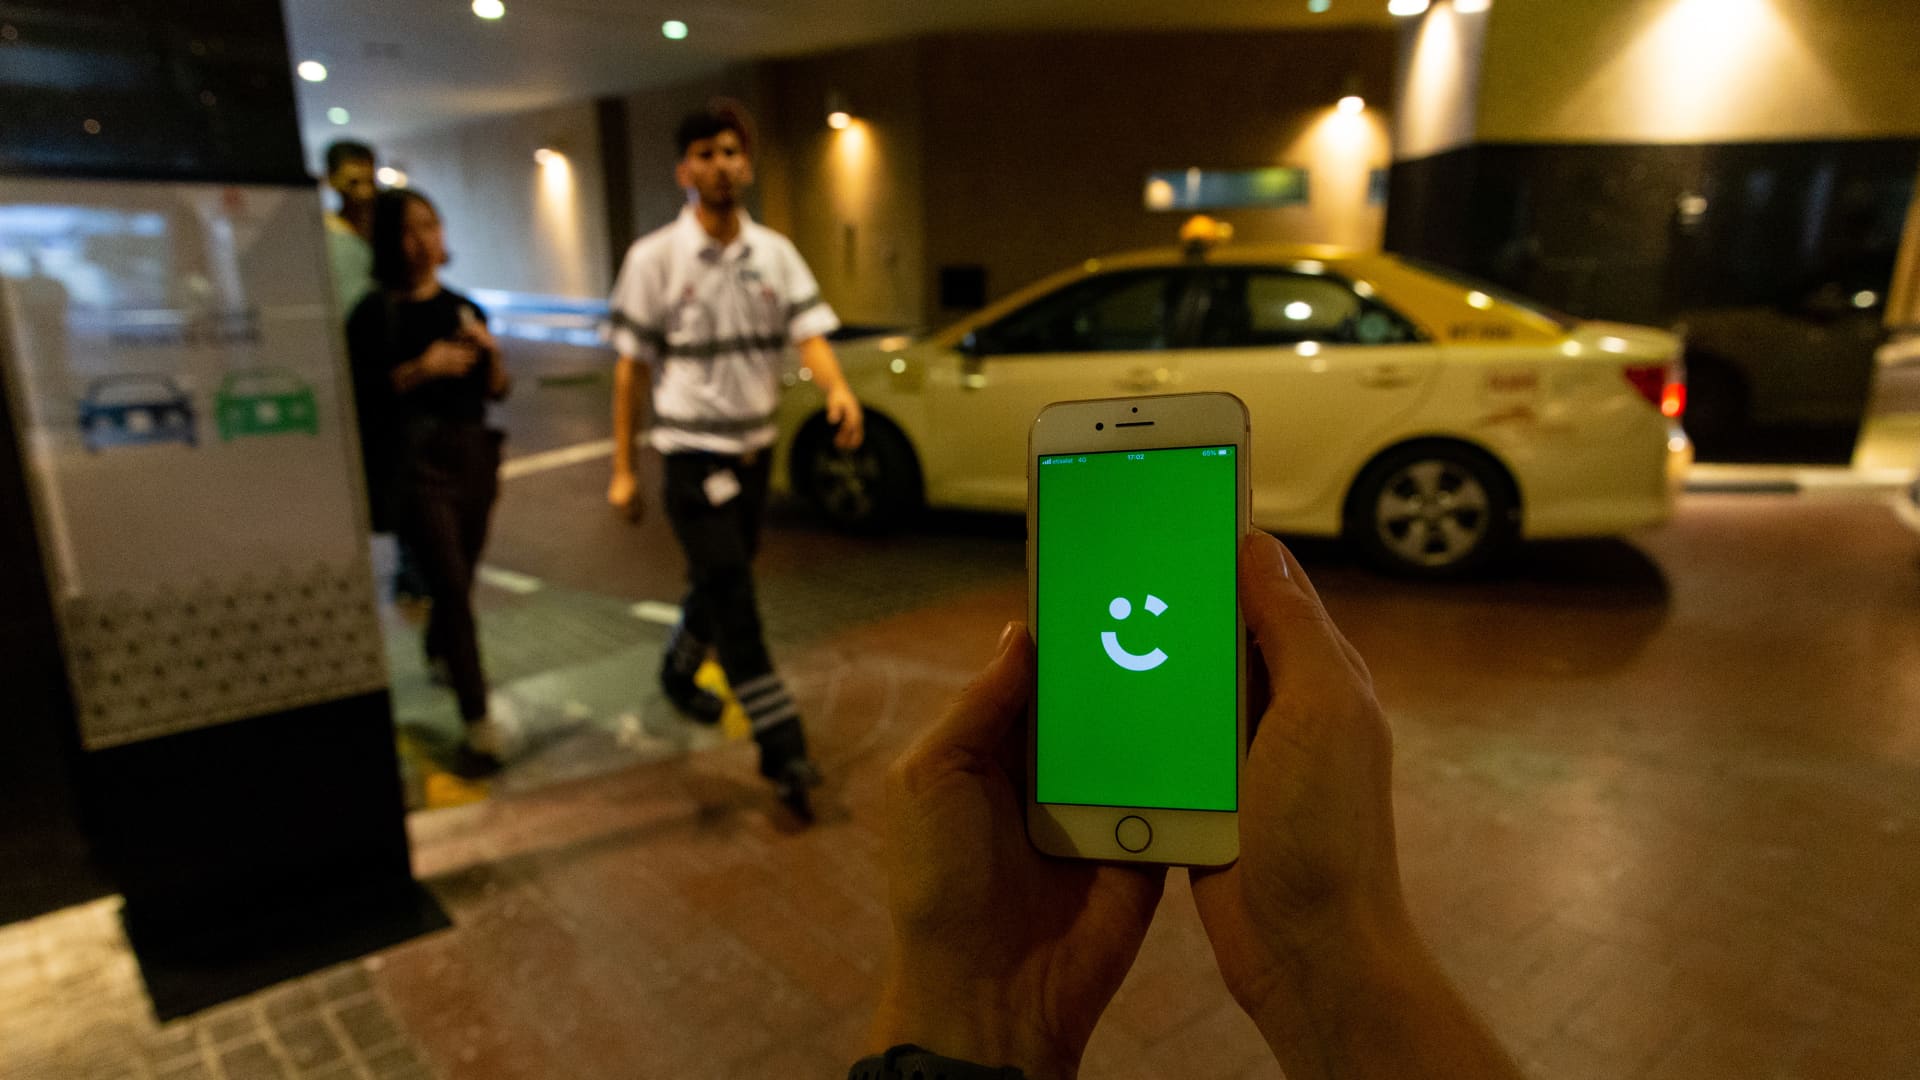 The Careem ride-hailing app is displayed on an iPhone at a shopping mall in Dubai.